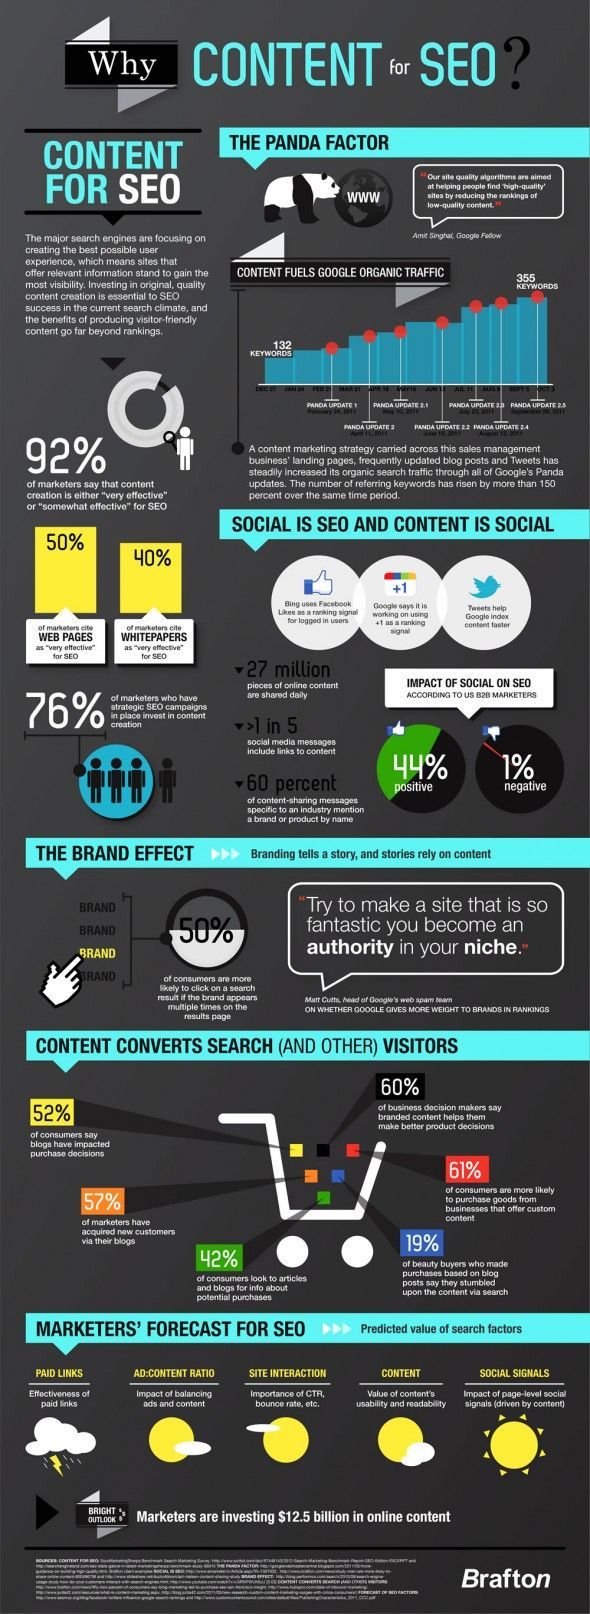 #INFOGRAPHIC: WHY CONTENT FOR SEO?